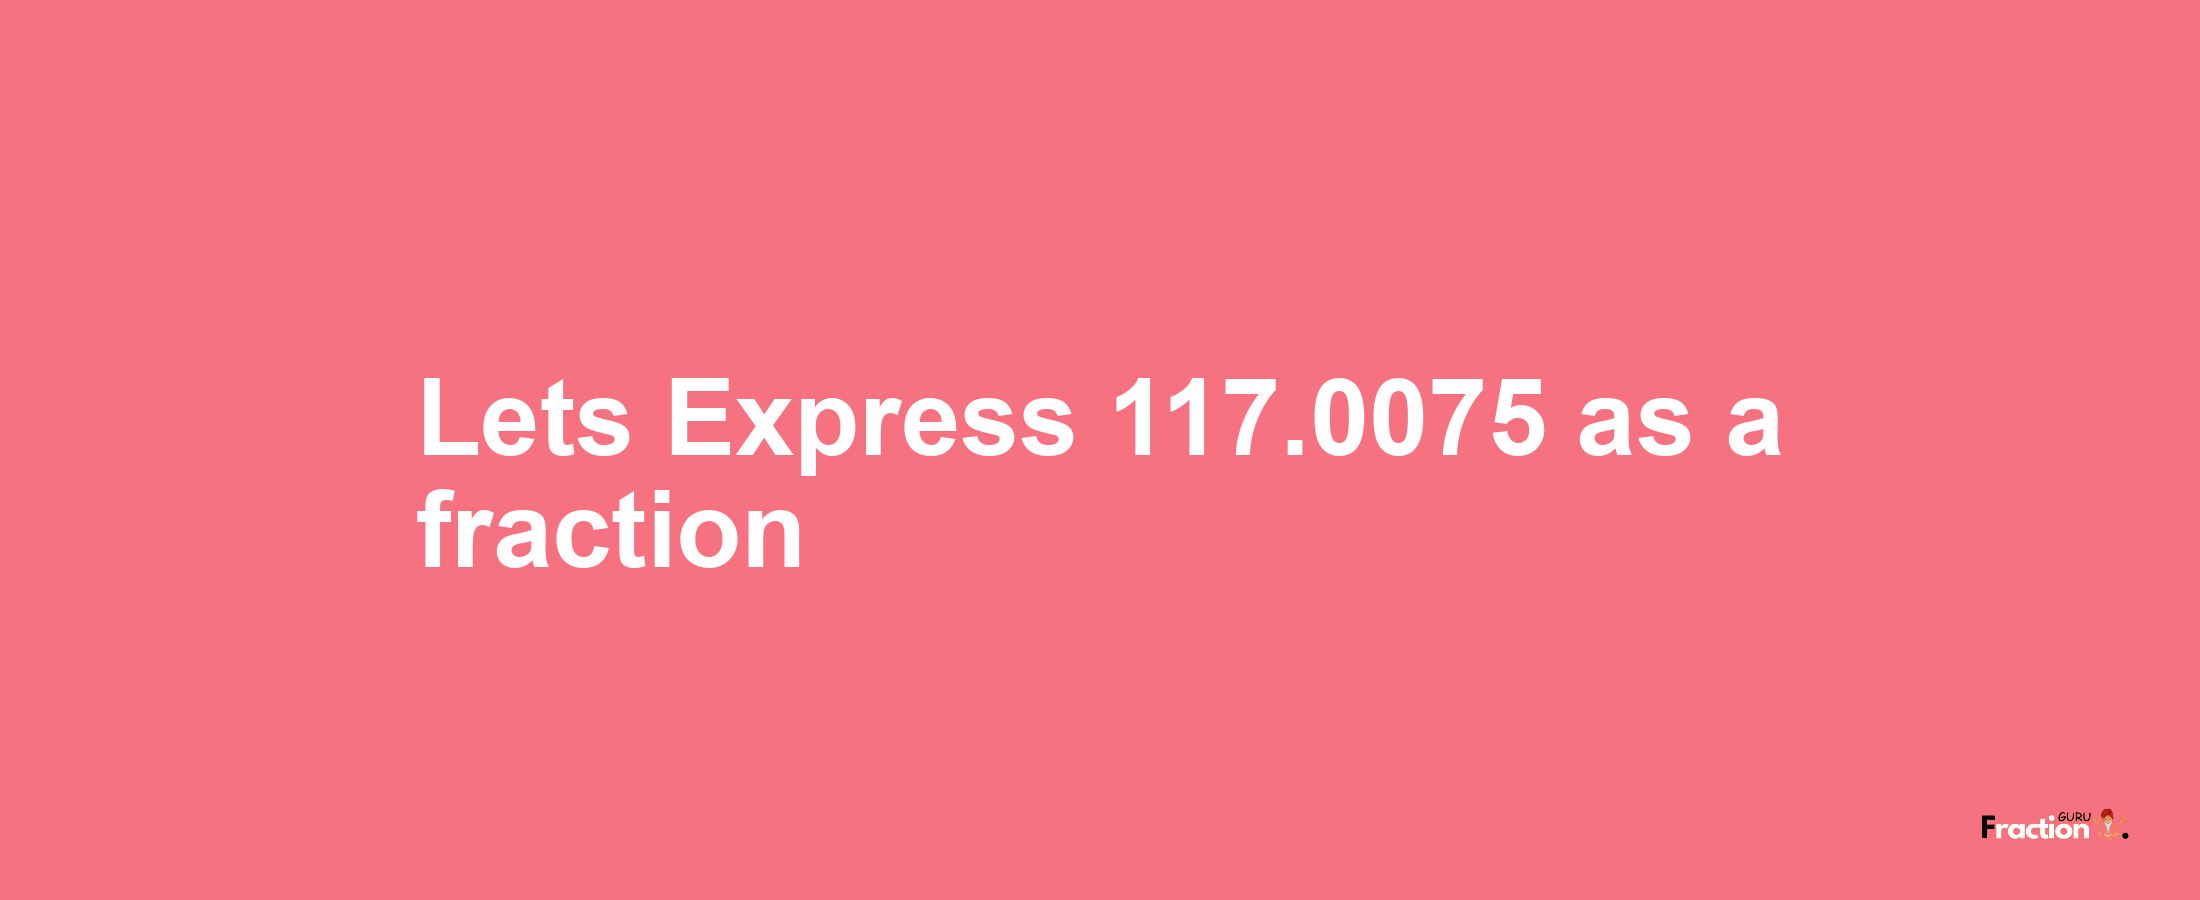 Lets Express 117.0075 as afraction